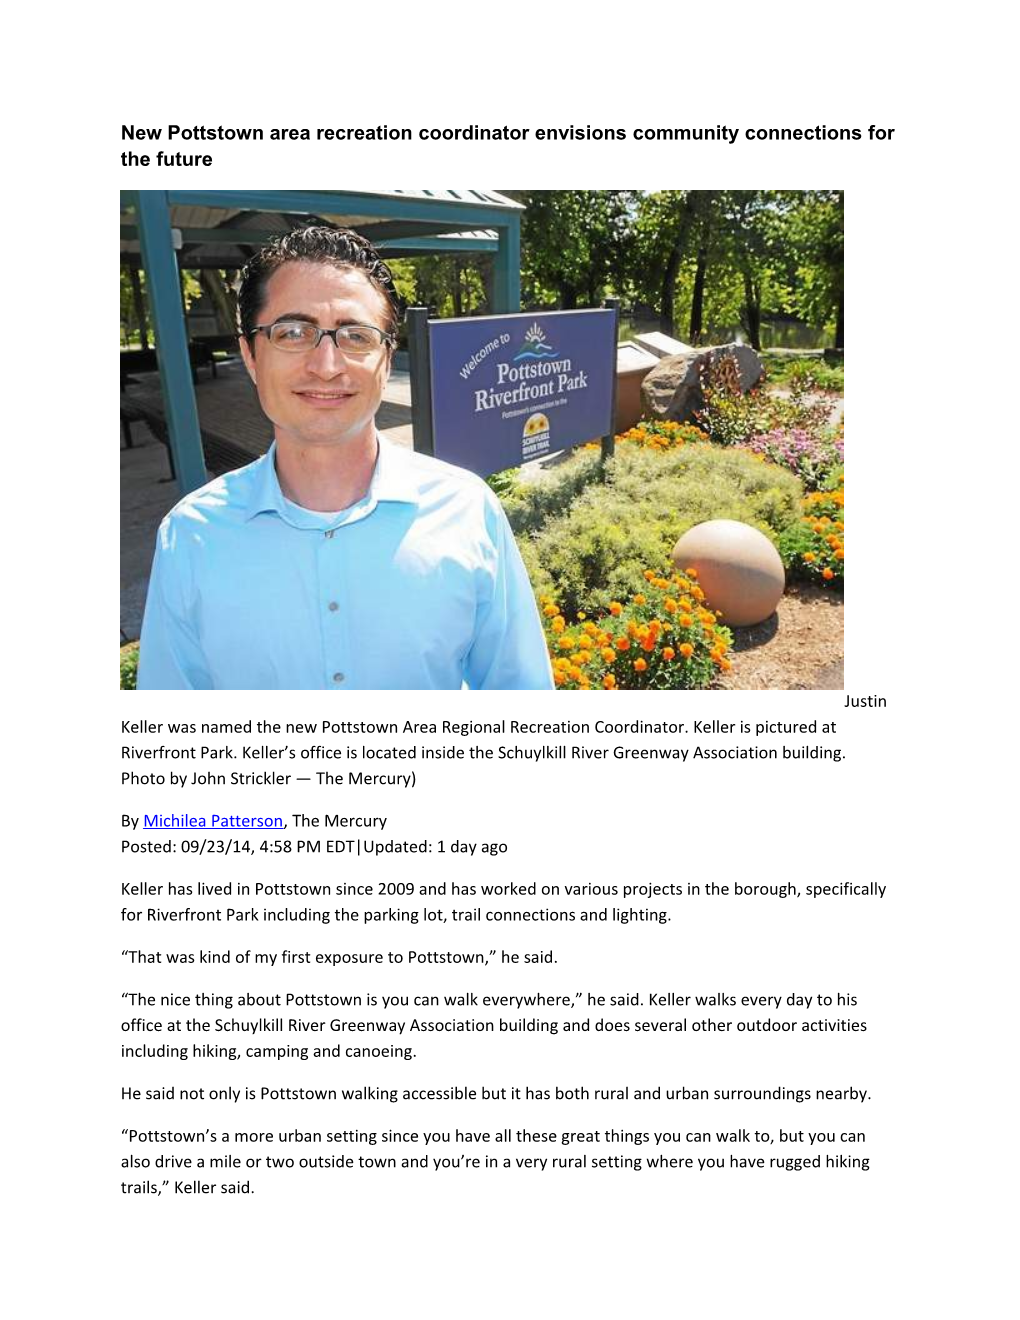 New Pottstown Area Recreation Coordinator Envisions Community Connections for the Future